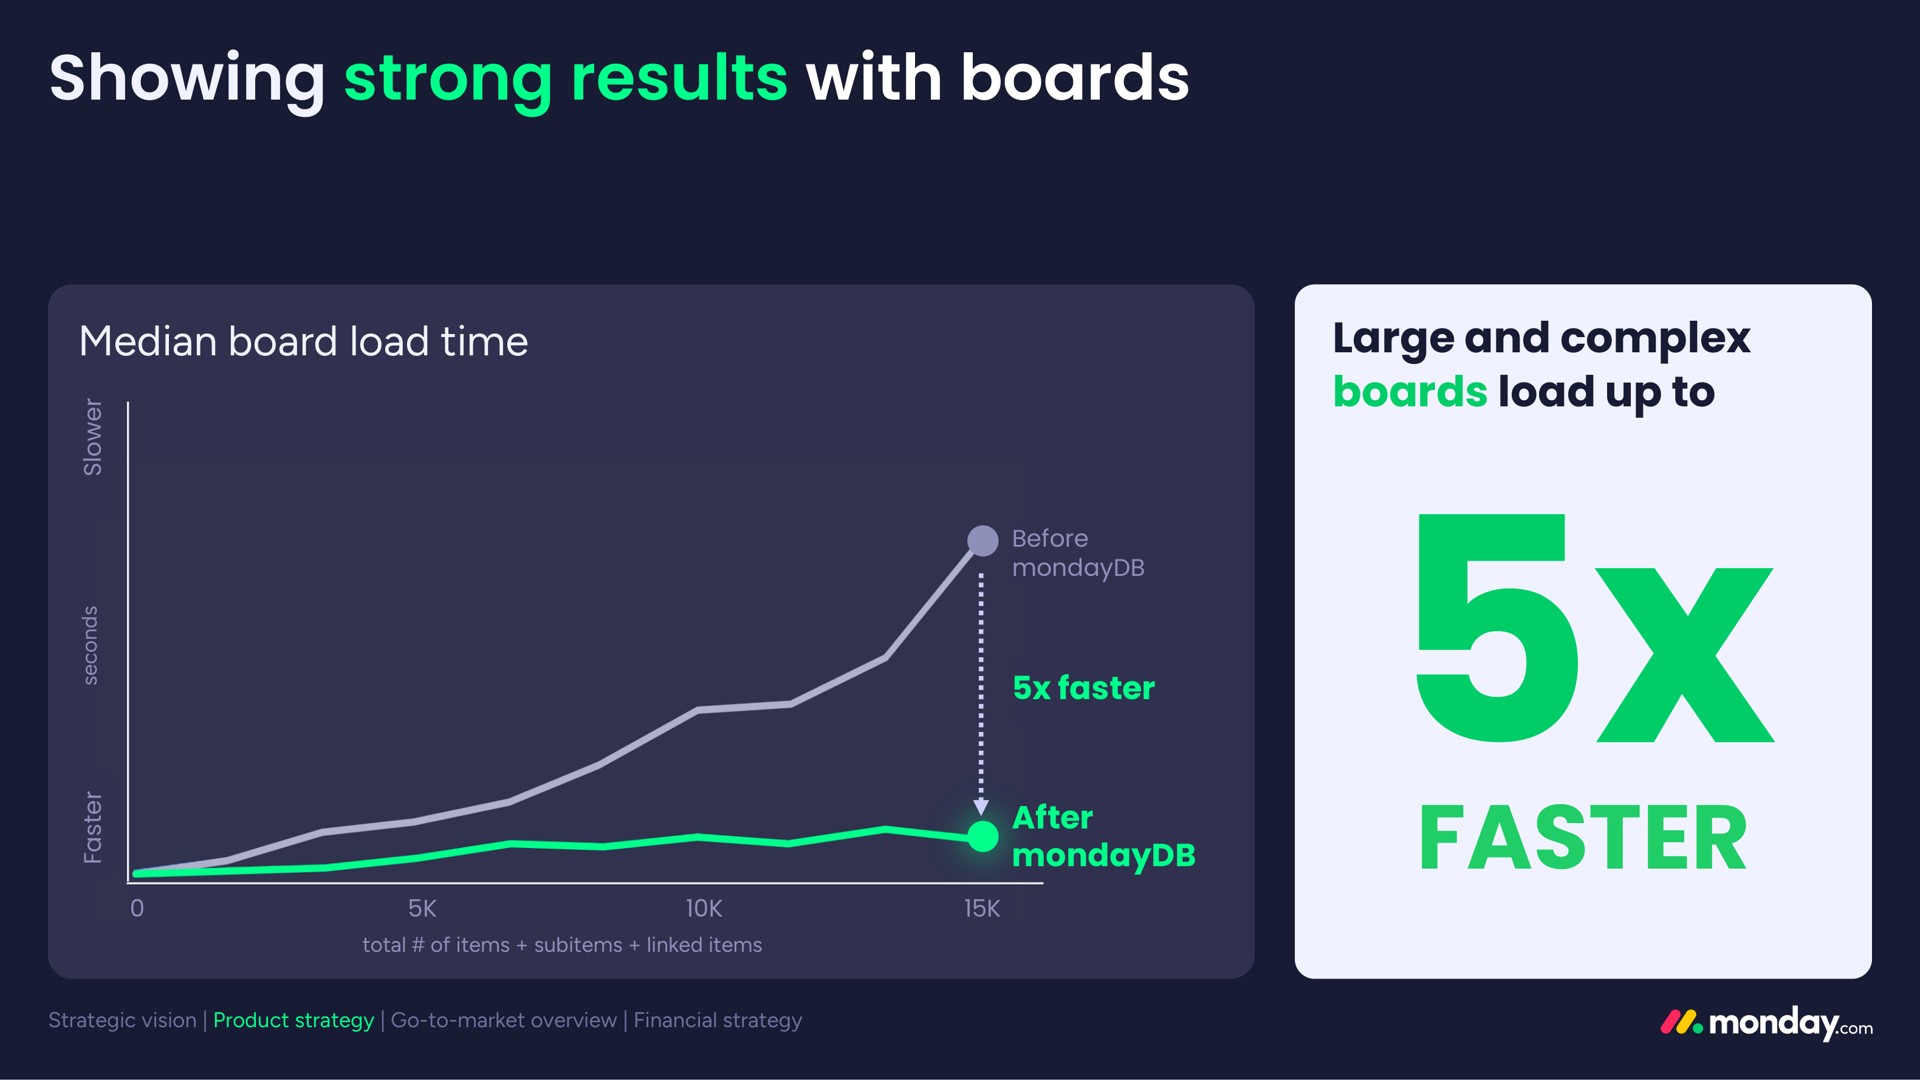 showing strong results with boards faster | monday.com